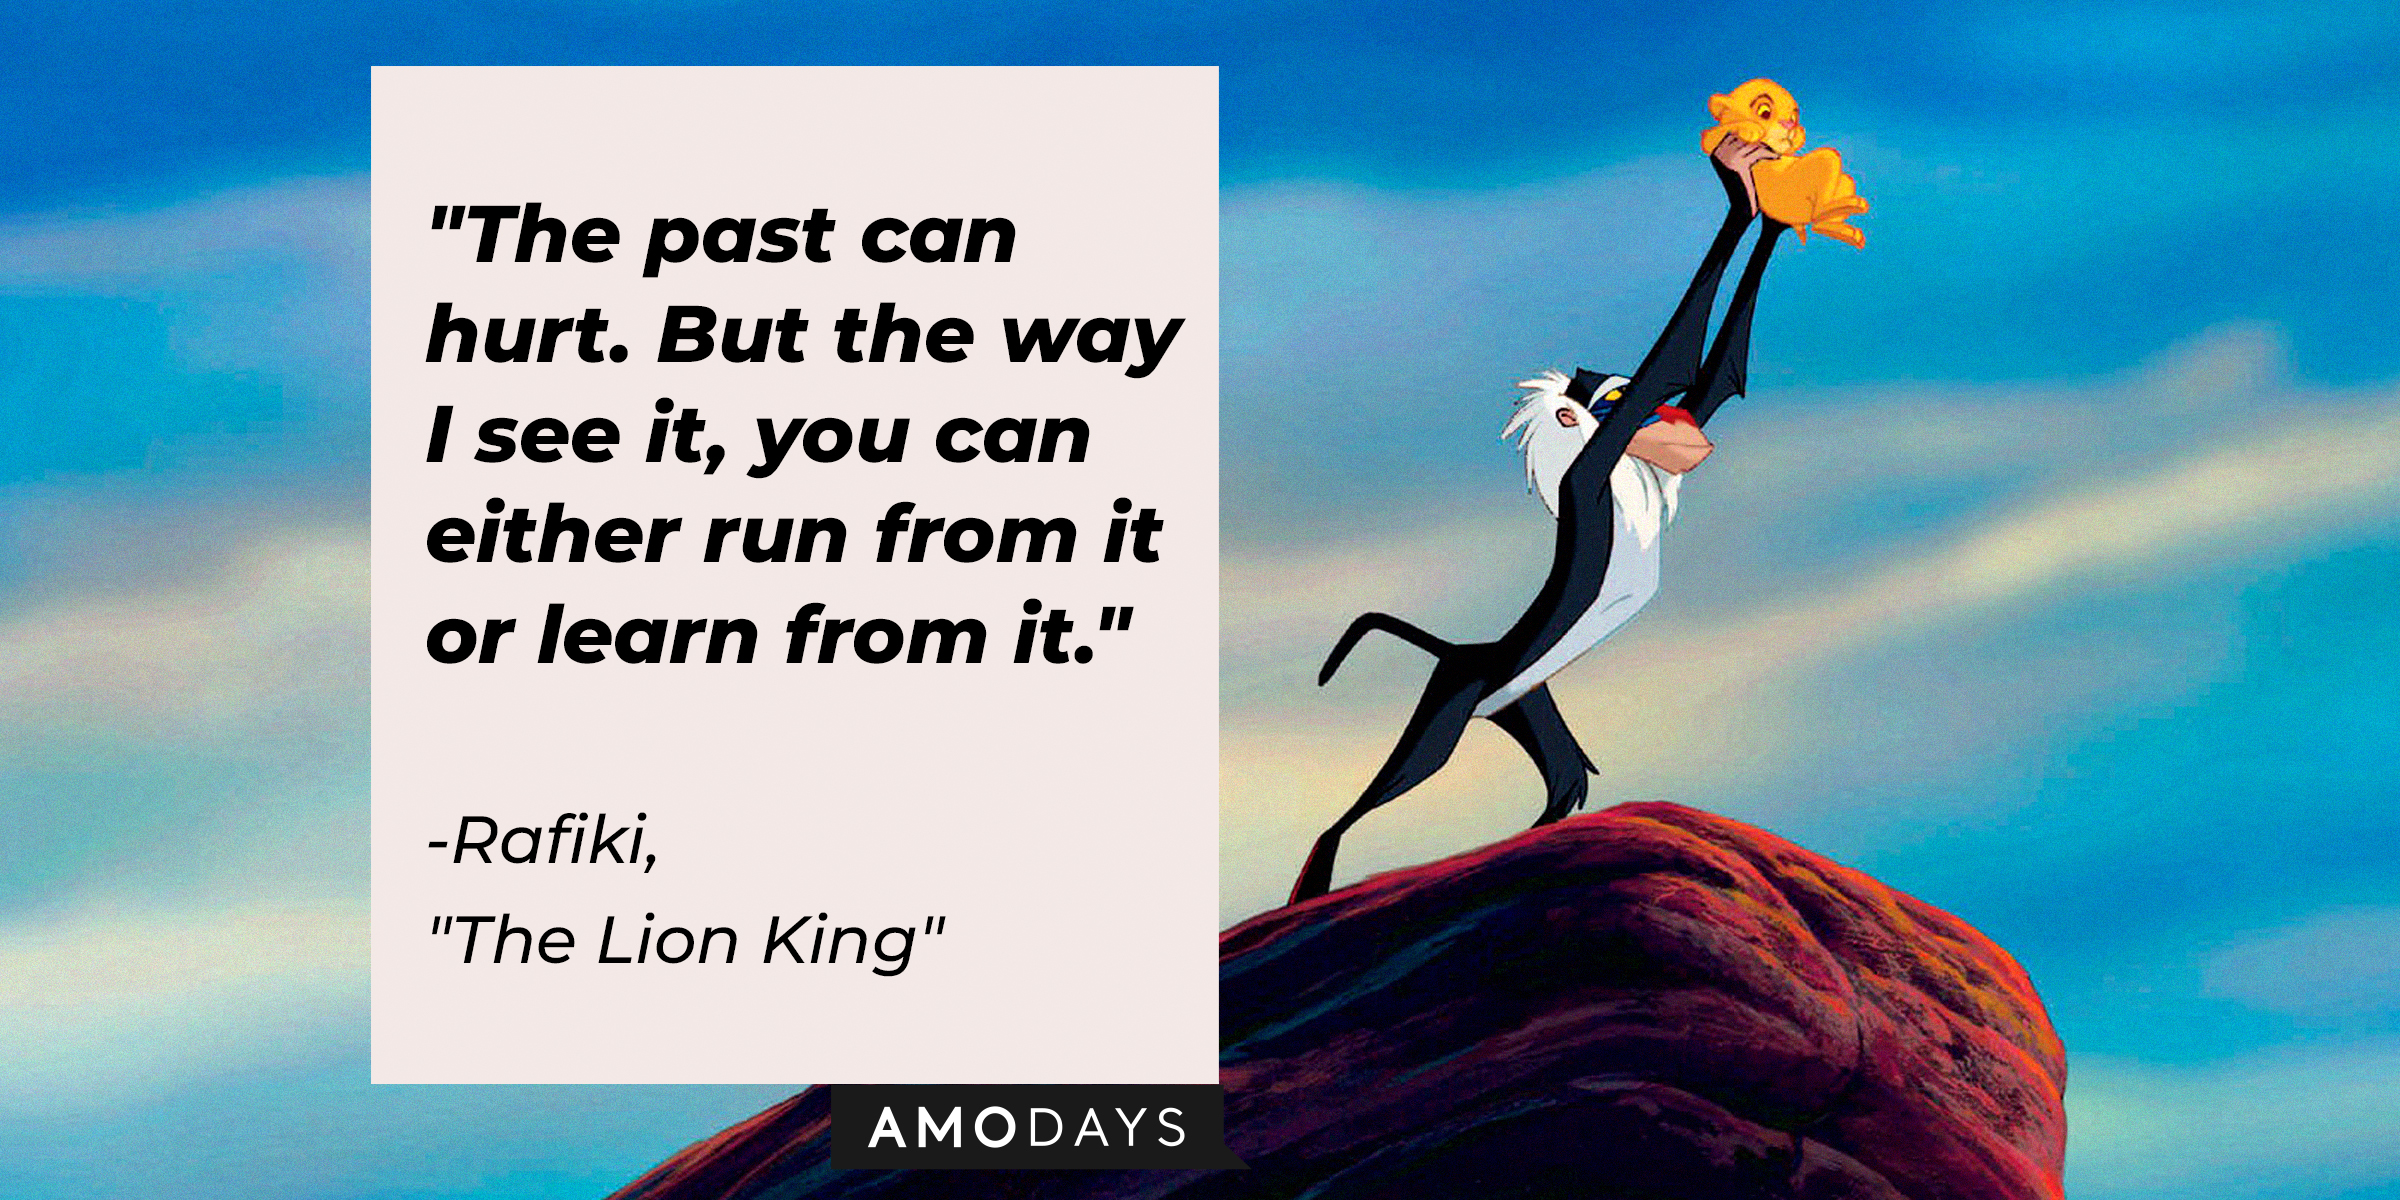 Rafiki with his quote: "The past can hurt. But the way I see it, you can either run from it or learn from it." | Source: Facebook.com/DisneyTheLionKing